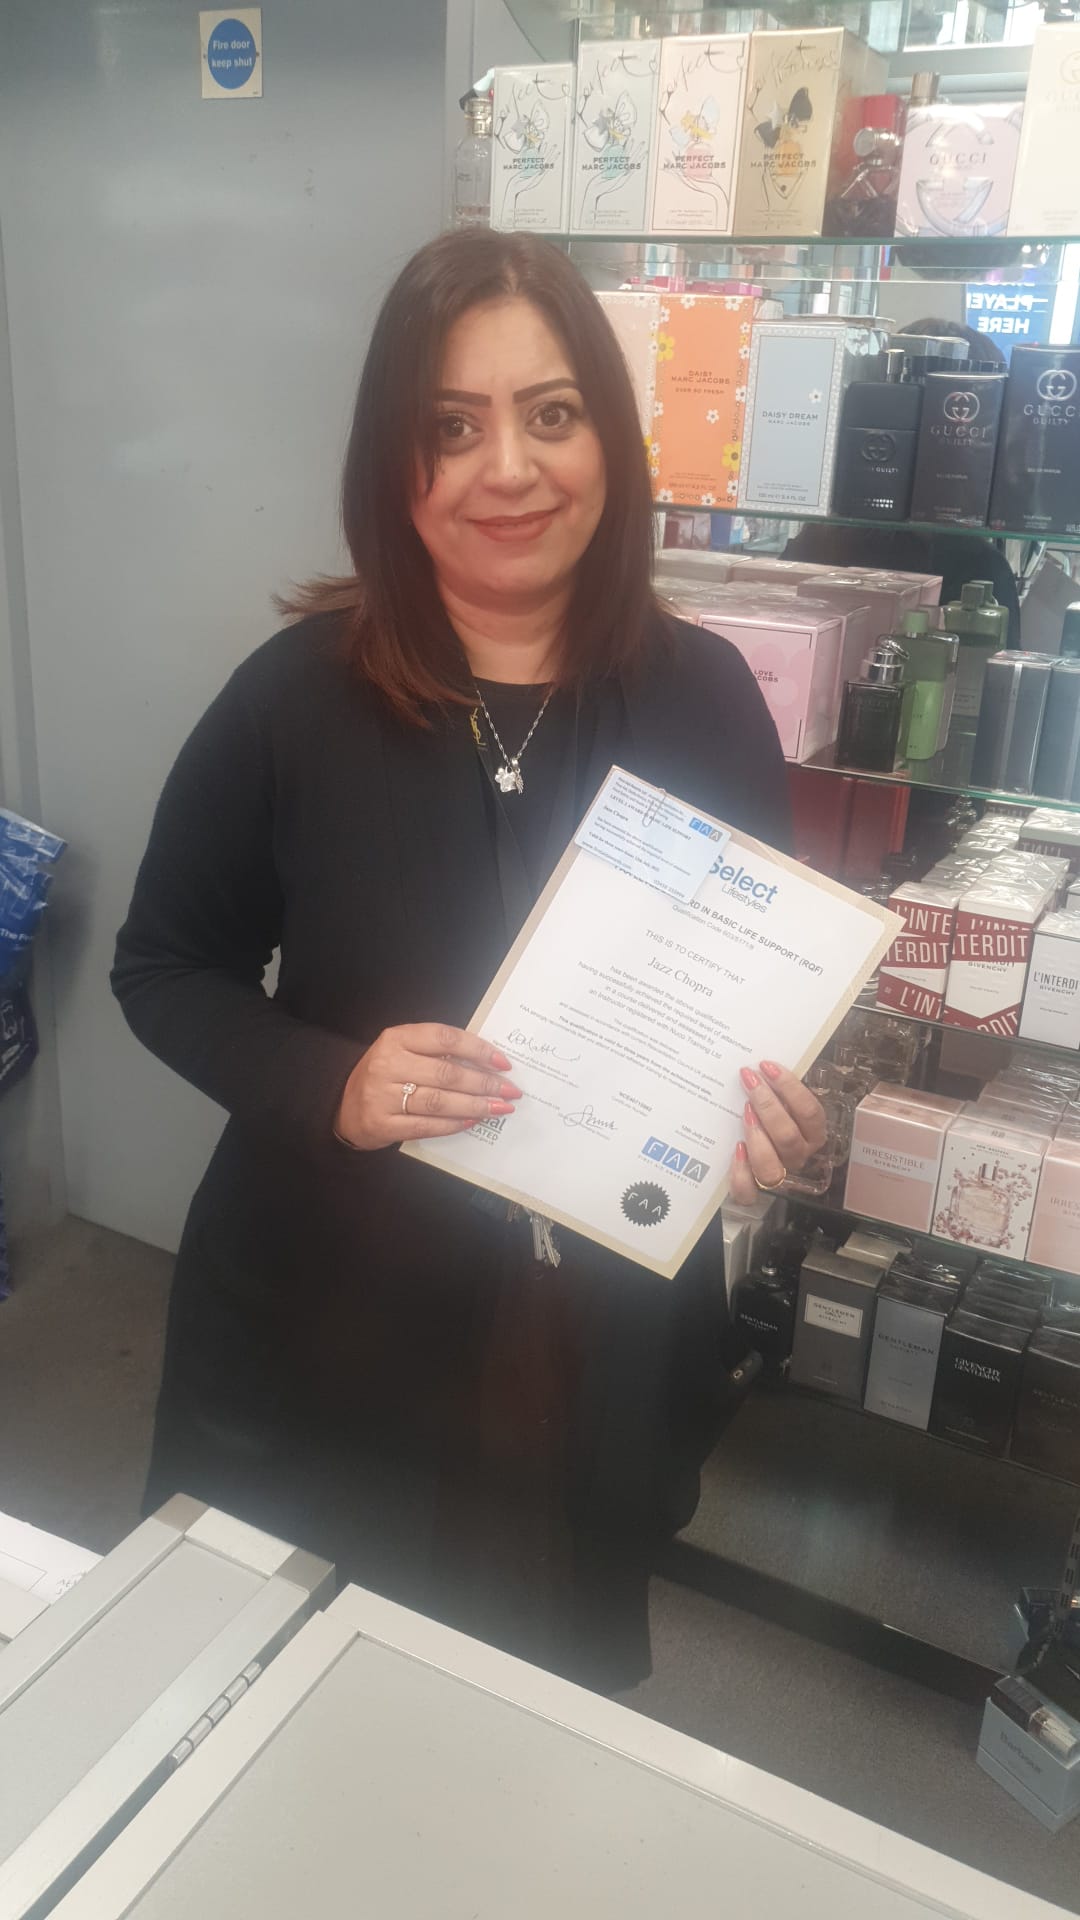 The Fragrance shop Kings Square have received their First Aid Certificate